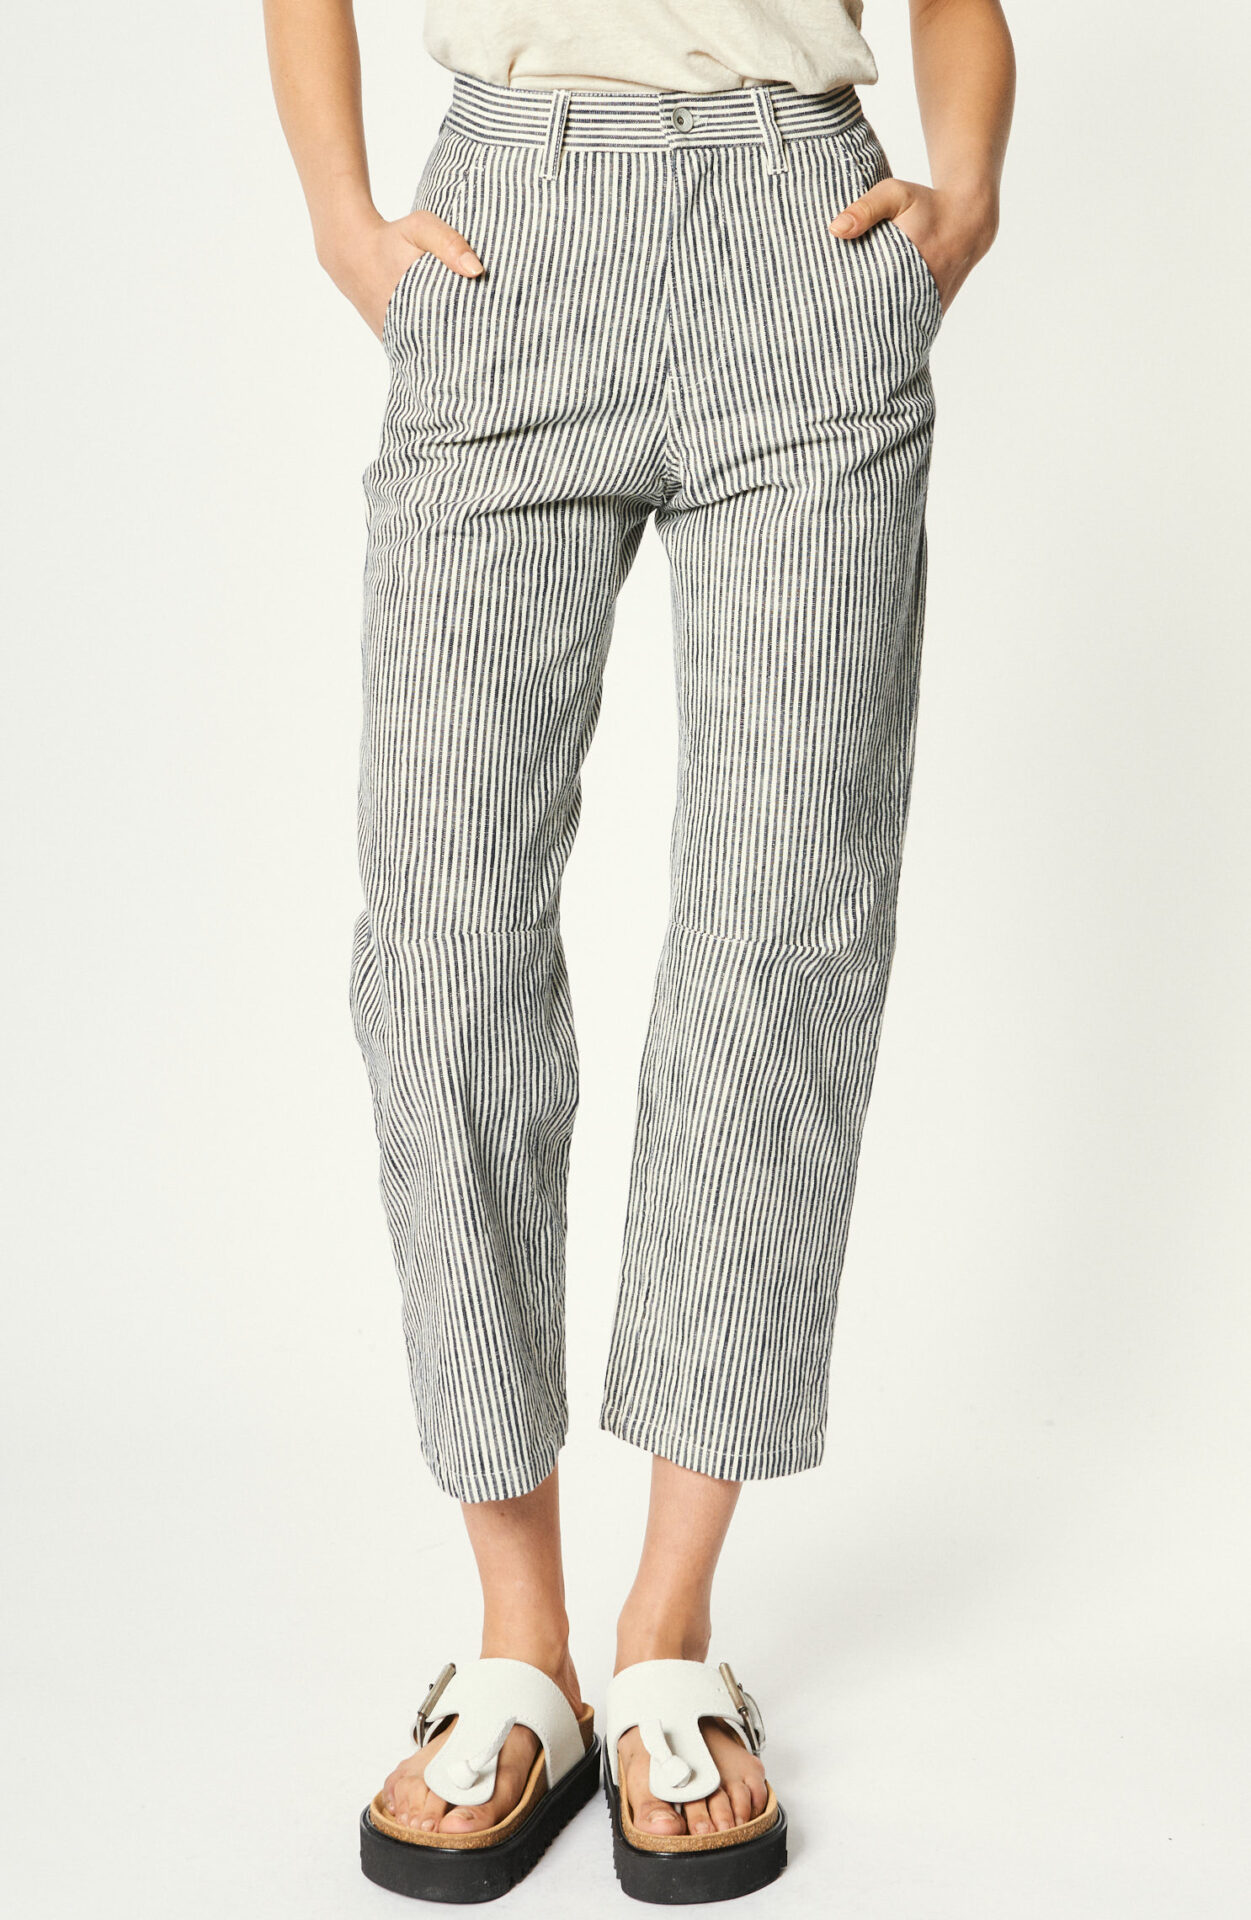 Striped cropped pants "Evita" in blue / white